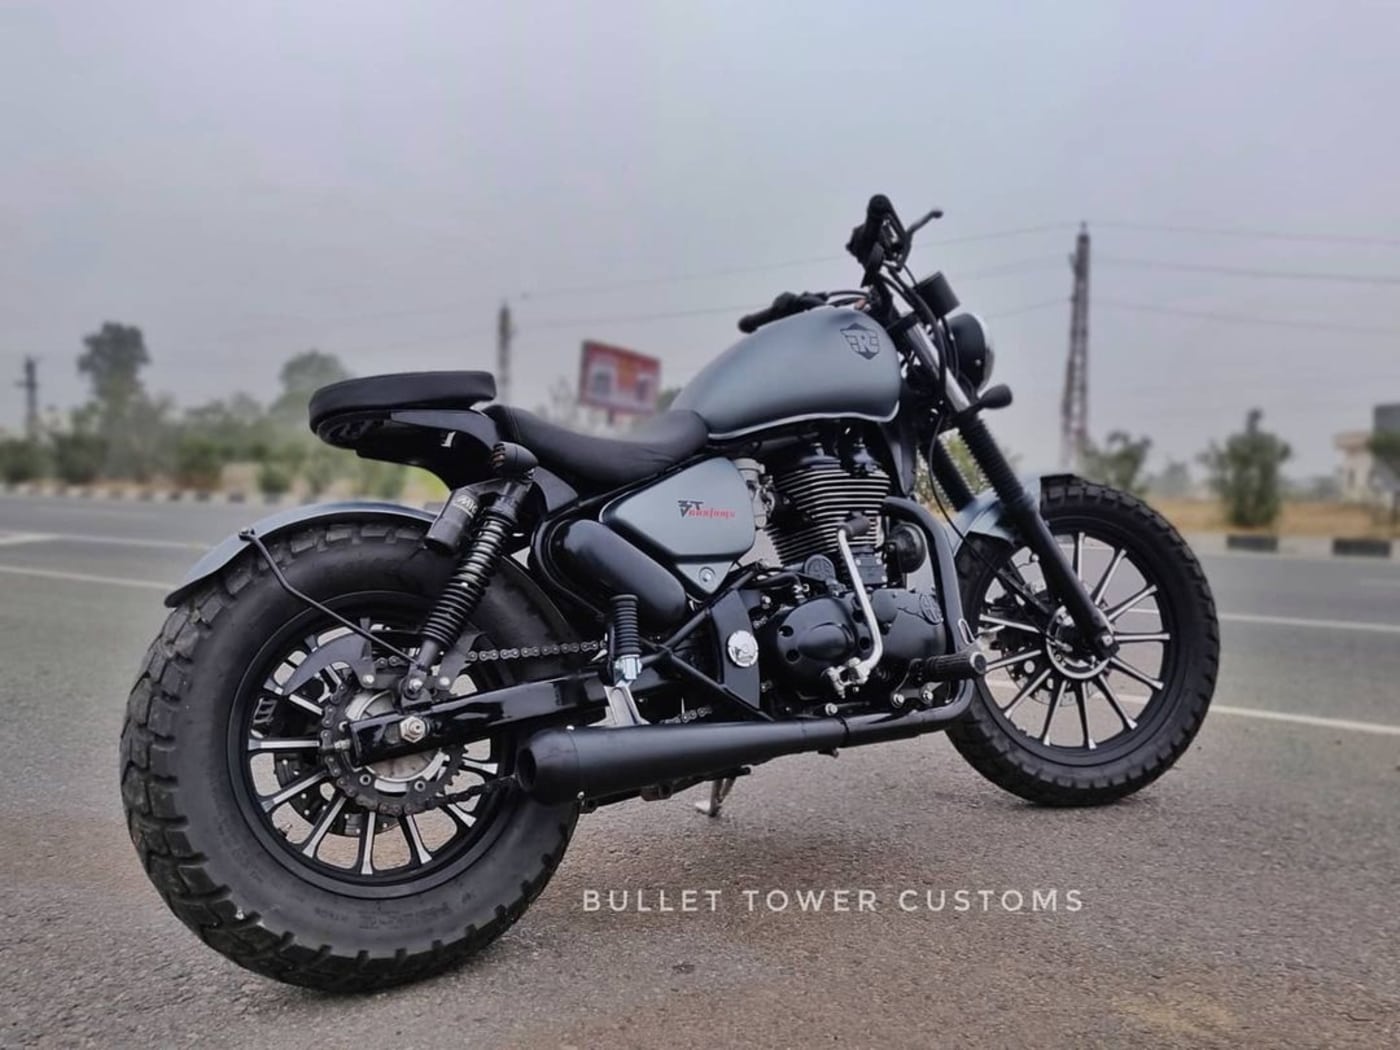 This Modified Royal Enfield Thunderbird 350 Looks Aggressive